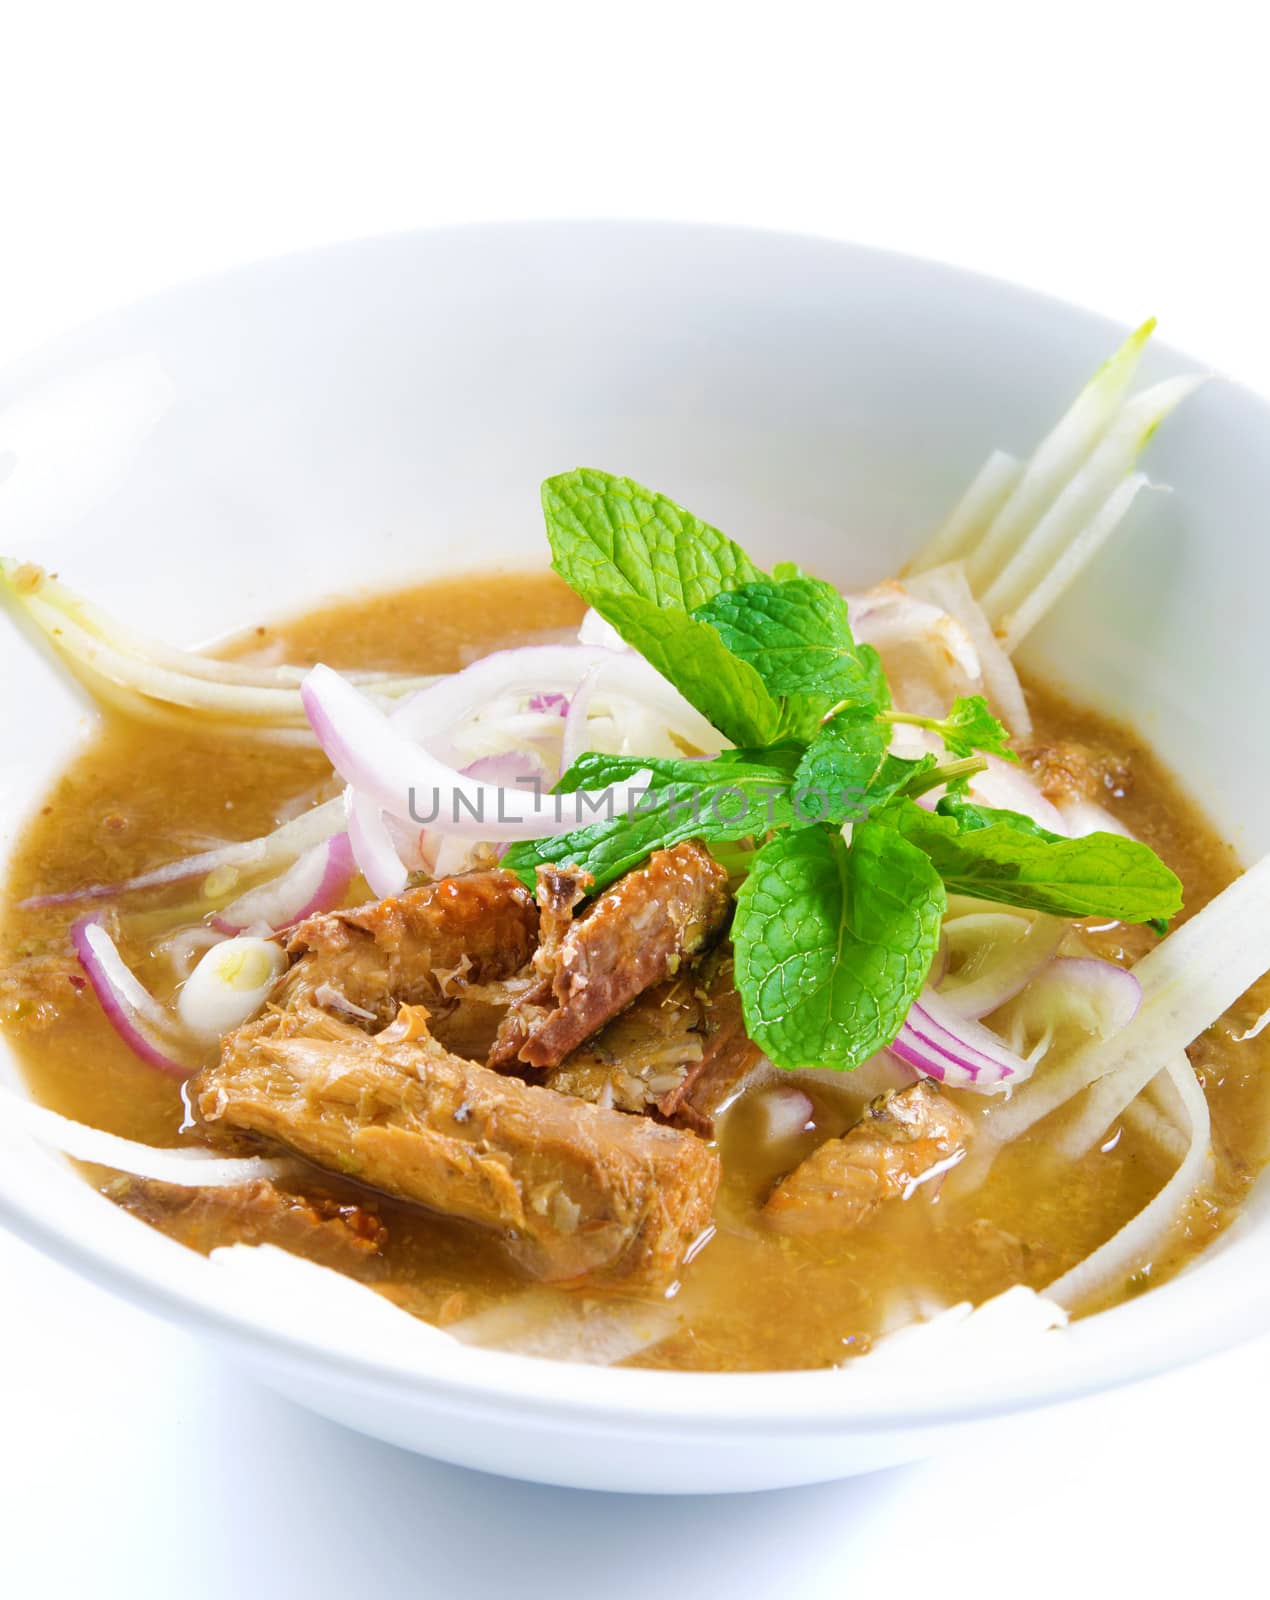 Assam or asam laksa  is a sour, fish-based soup. Traditional Malay dish, malaysian food, Asian cuisine.